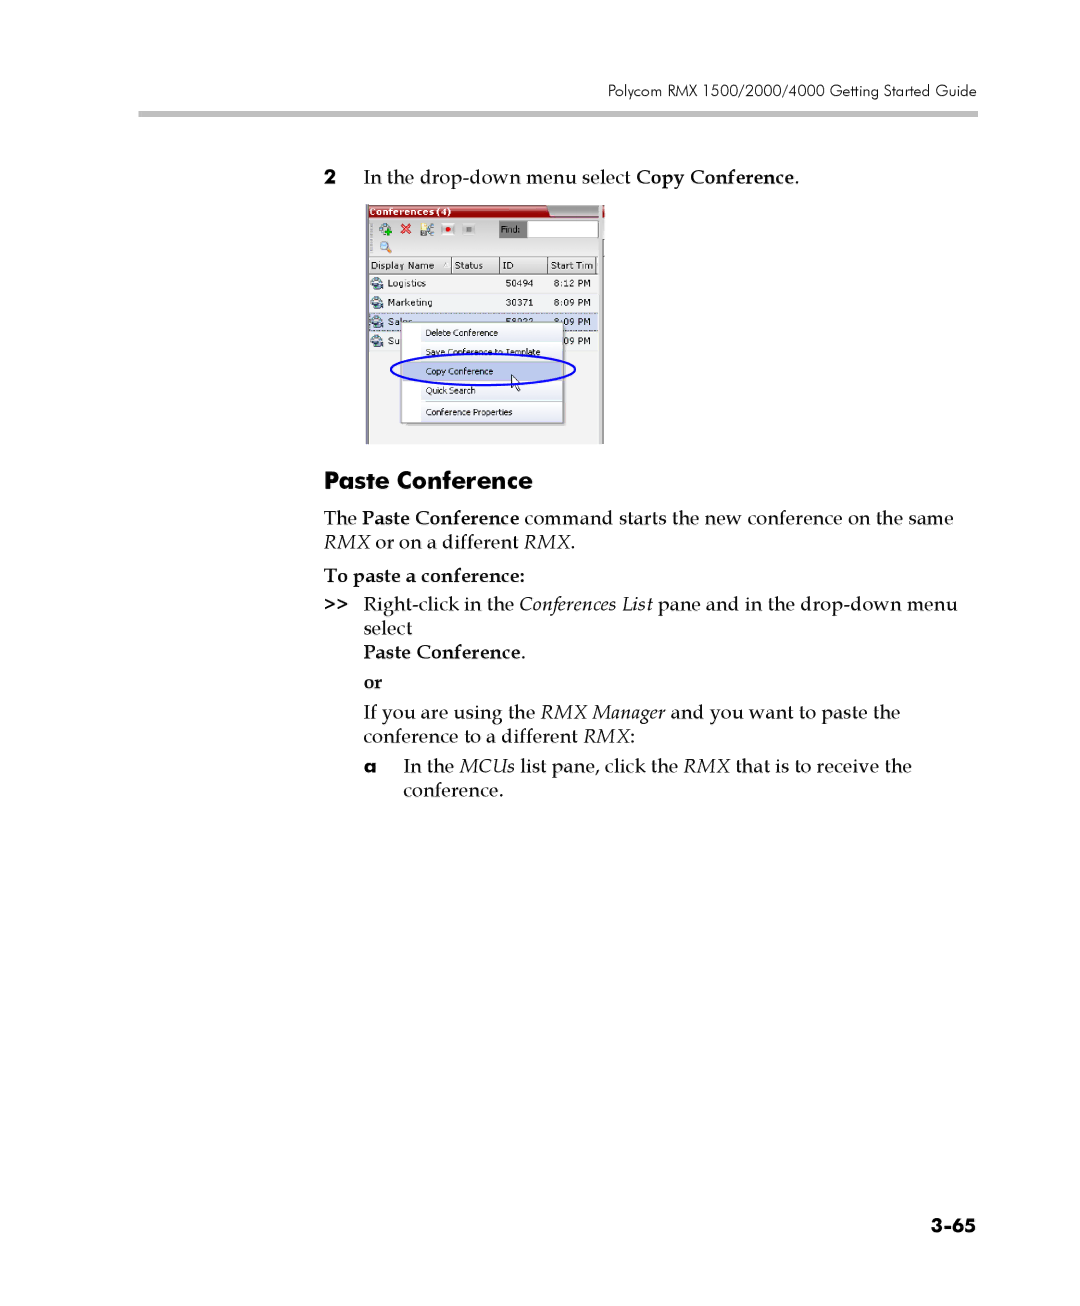 Polycom DOC2560C manual To paste a conference, Paste Conference. or 